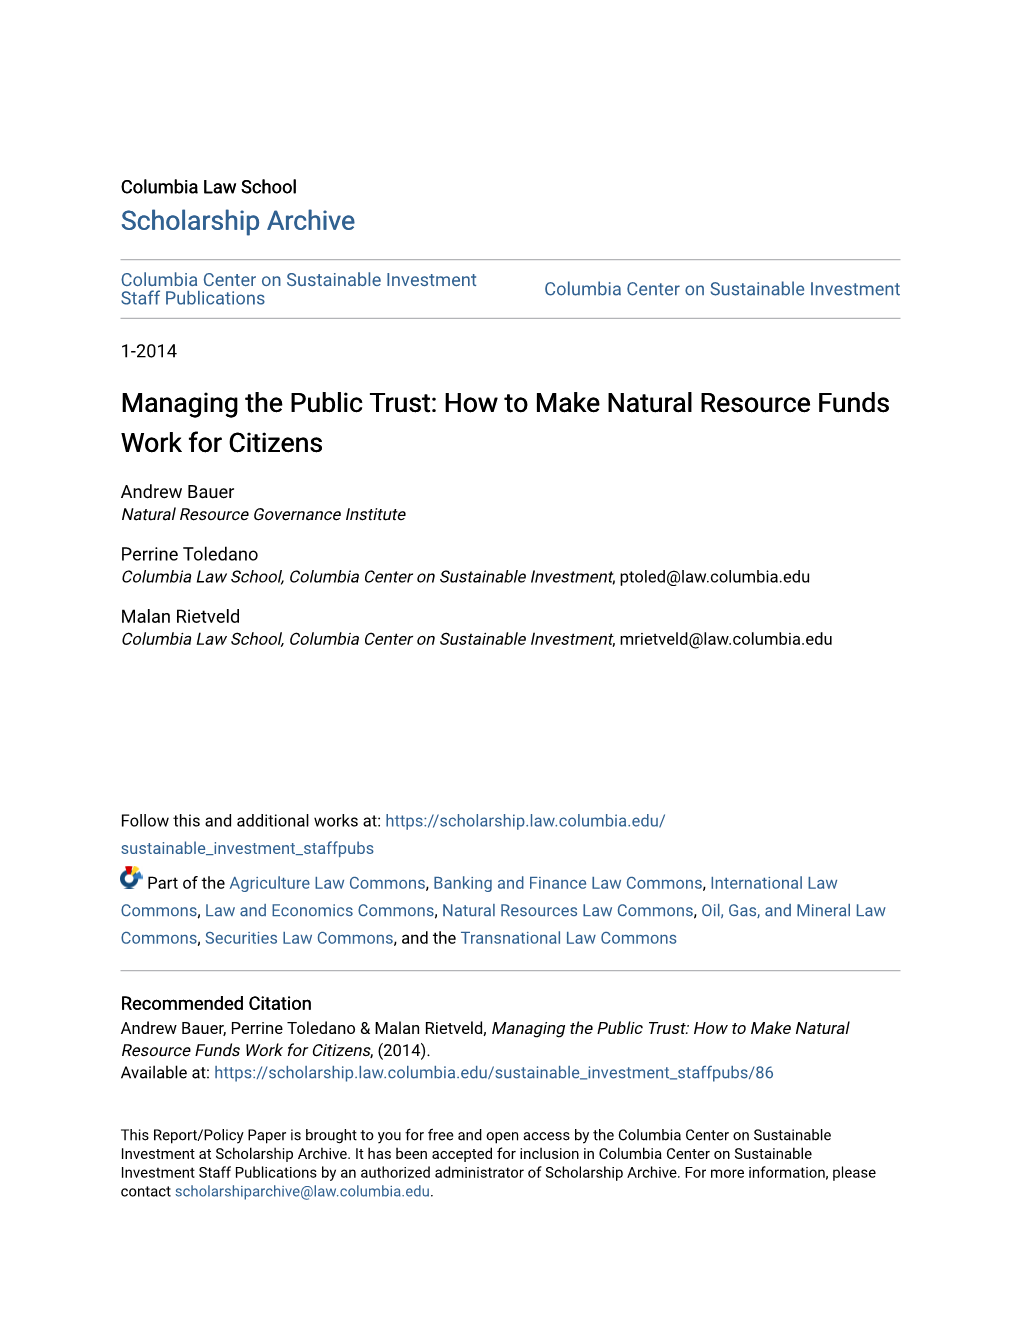 How to Make Natural Resource Funds Work for Citizens